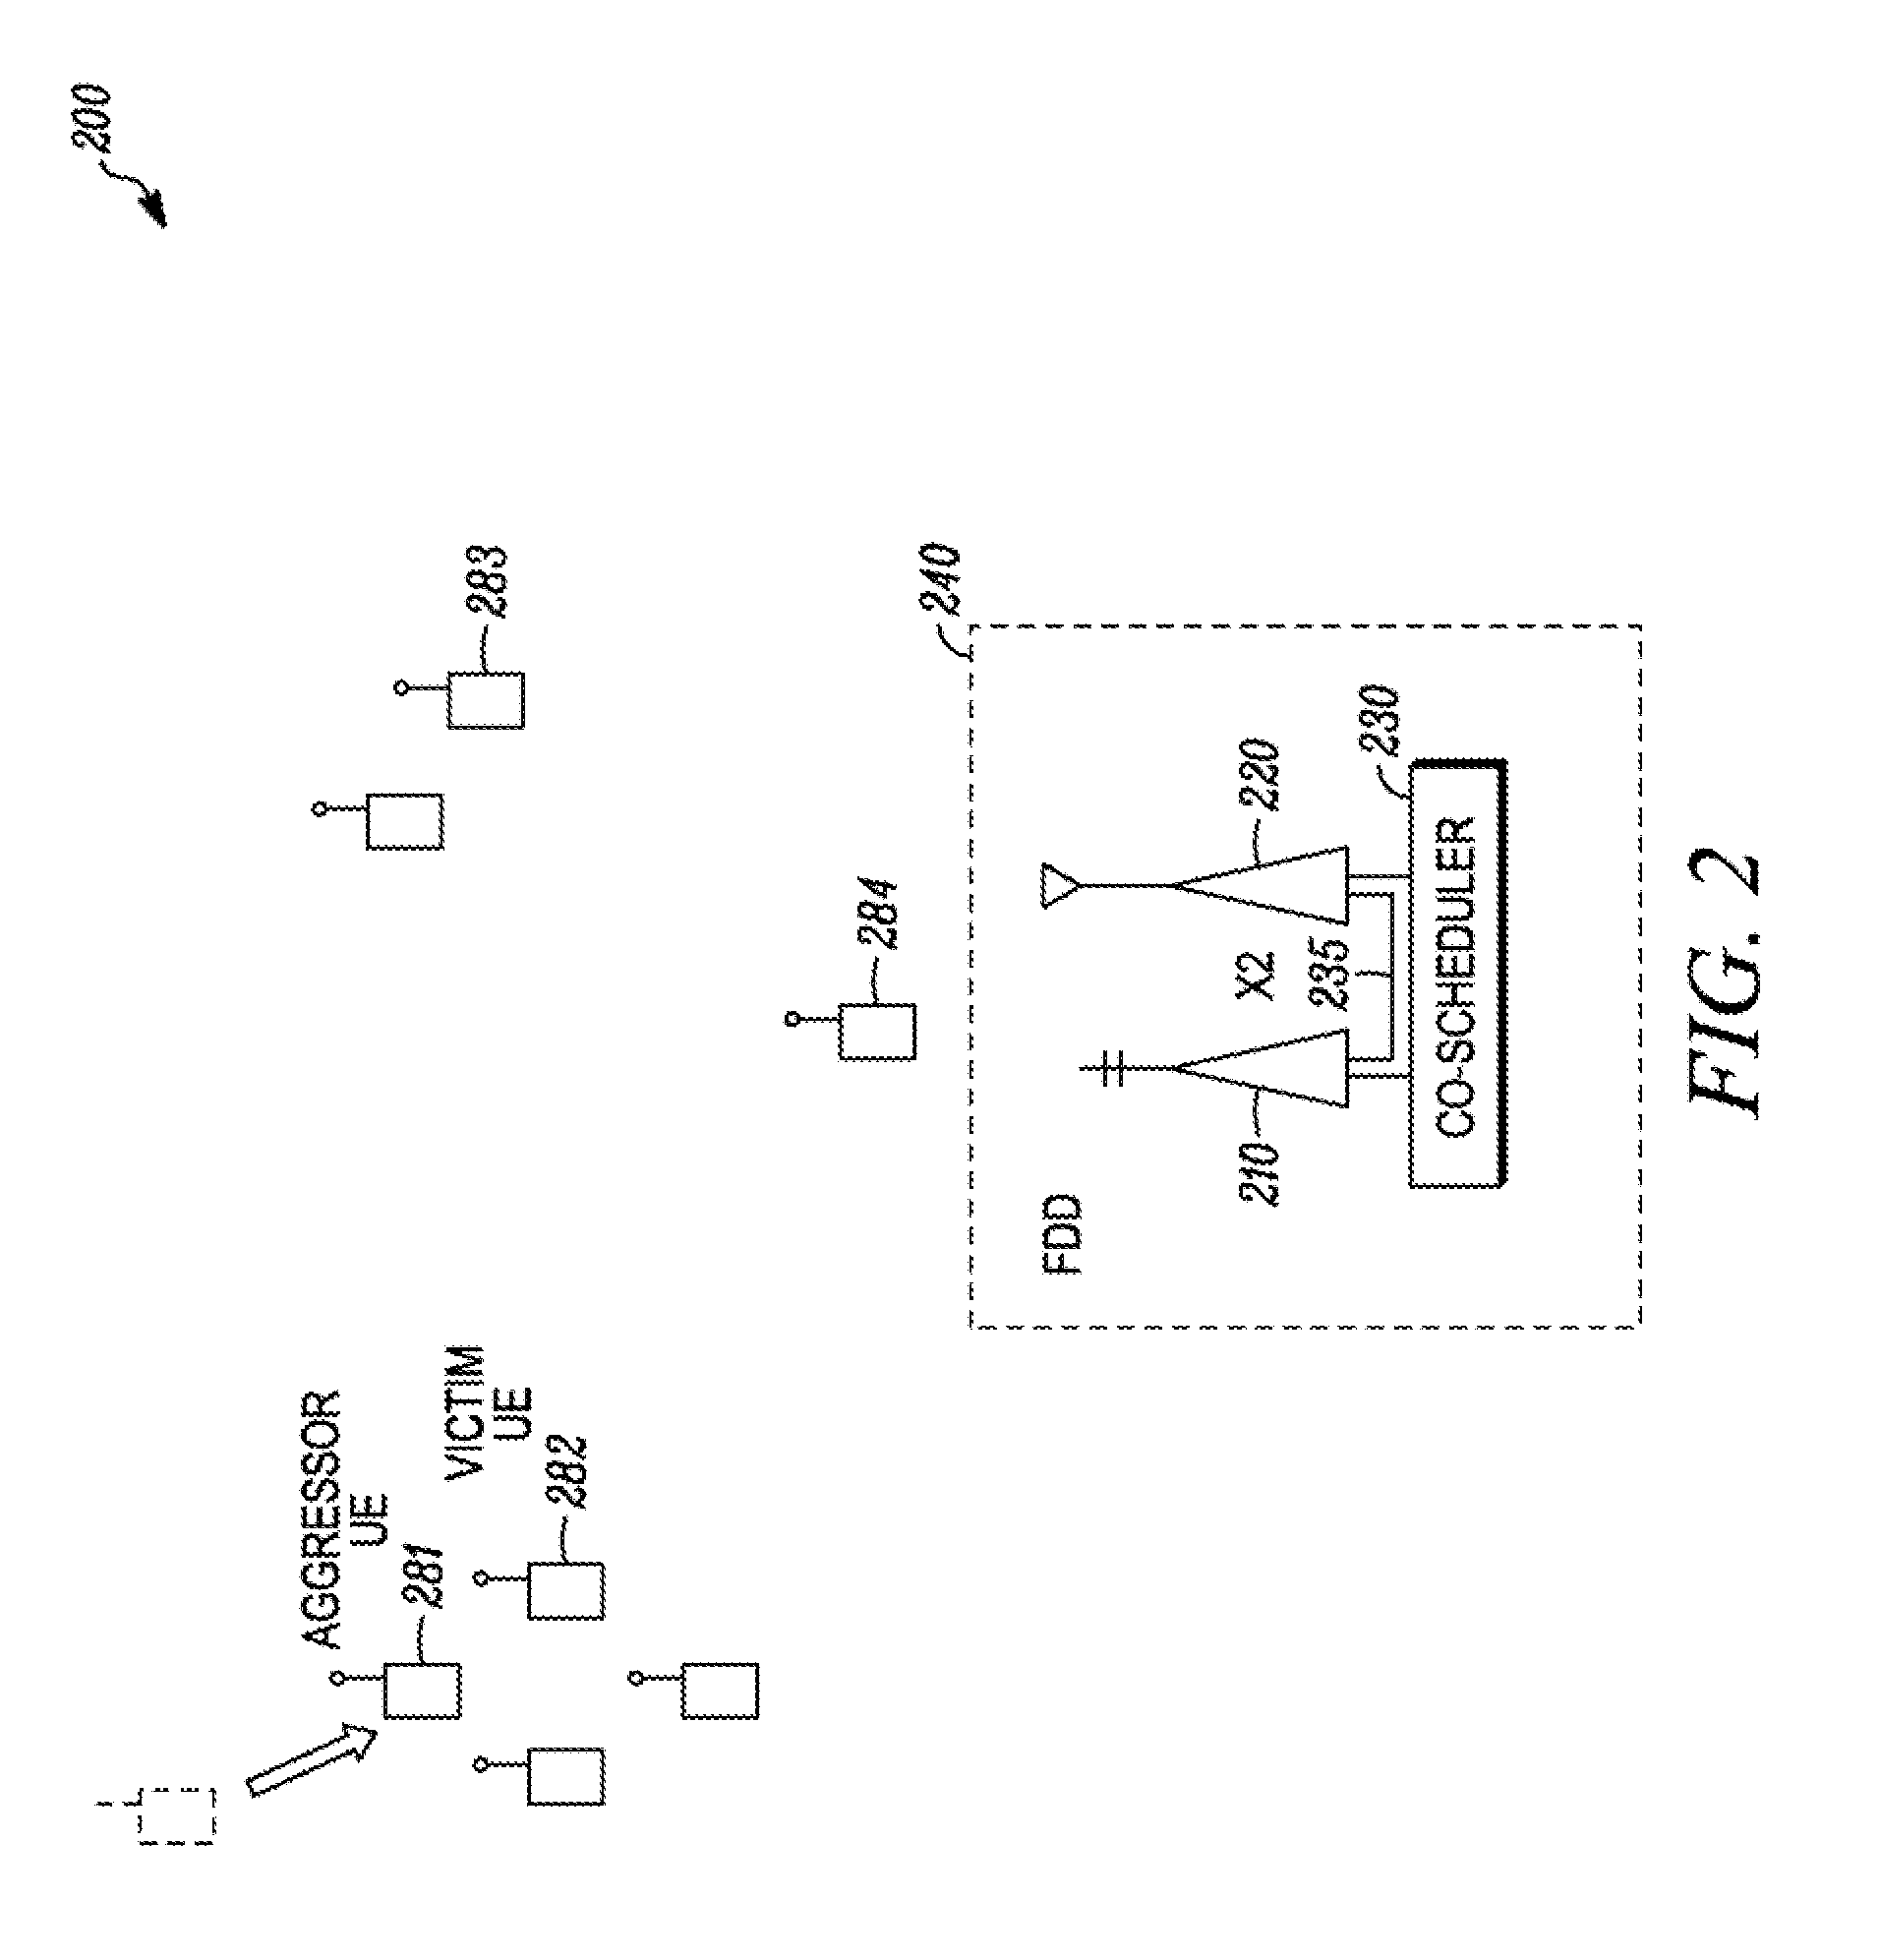 Method and Apparatus for Multi-Radio Coexistence on Adjacent Frequency Bands